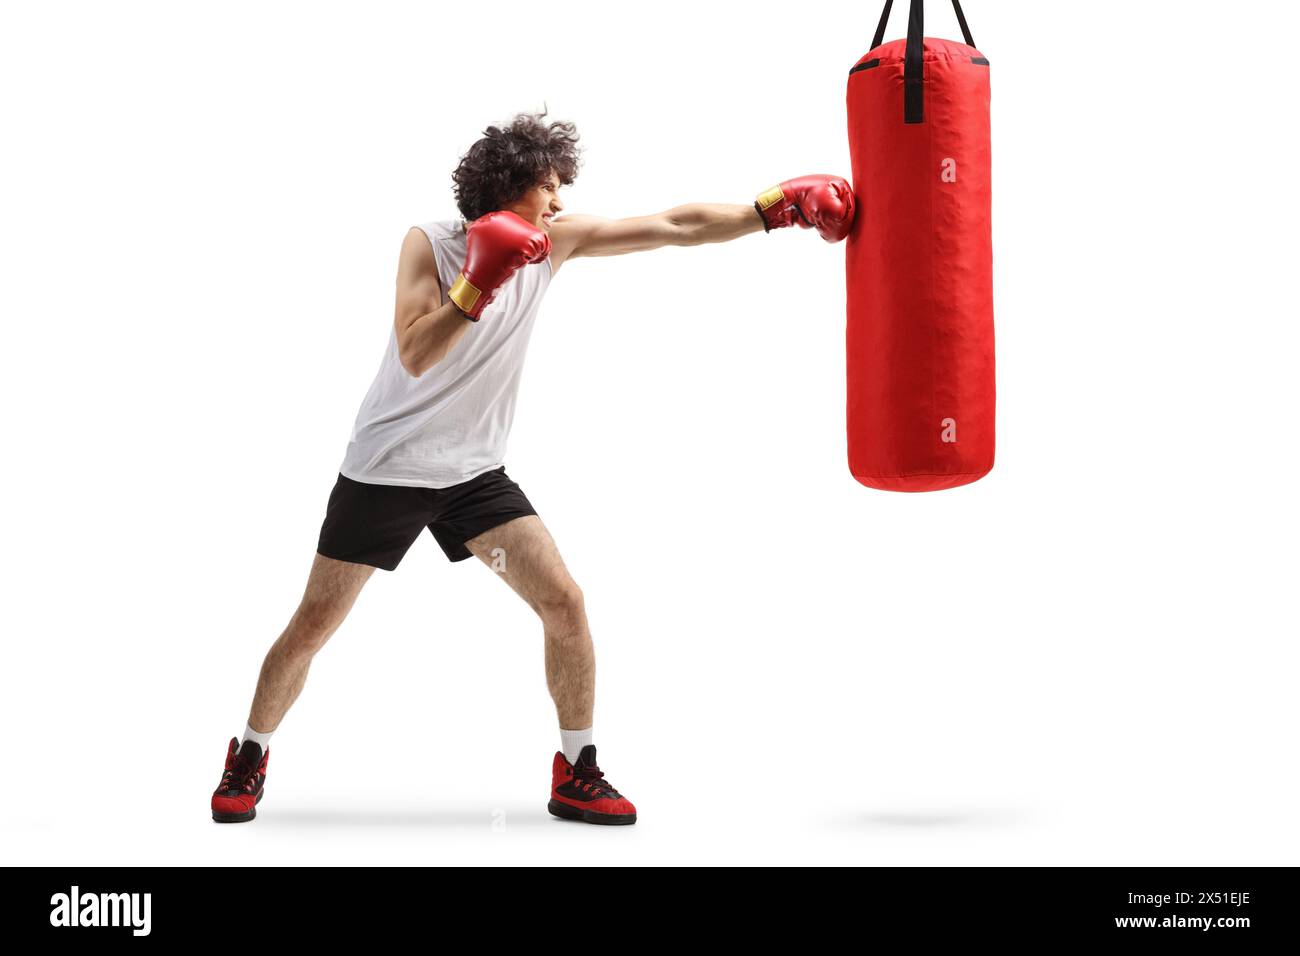 Young man punching a boxing bag isolated on white background Stock Photo